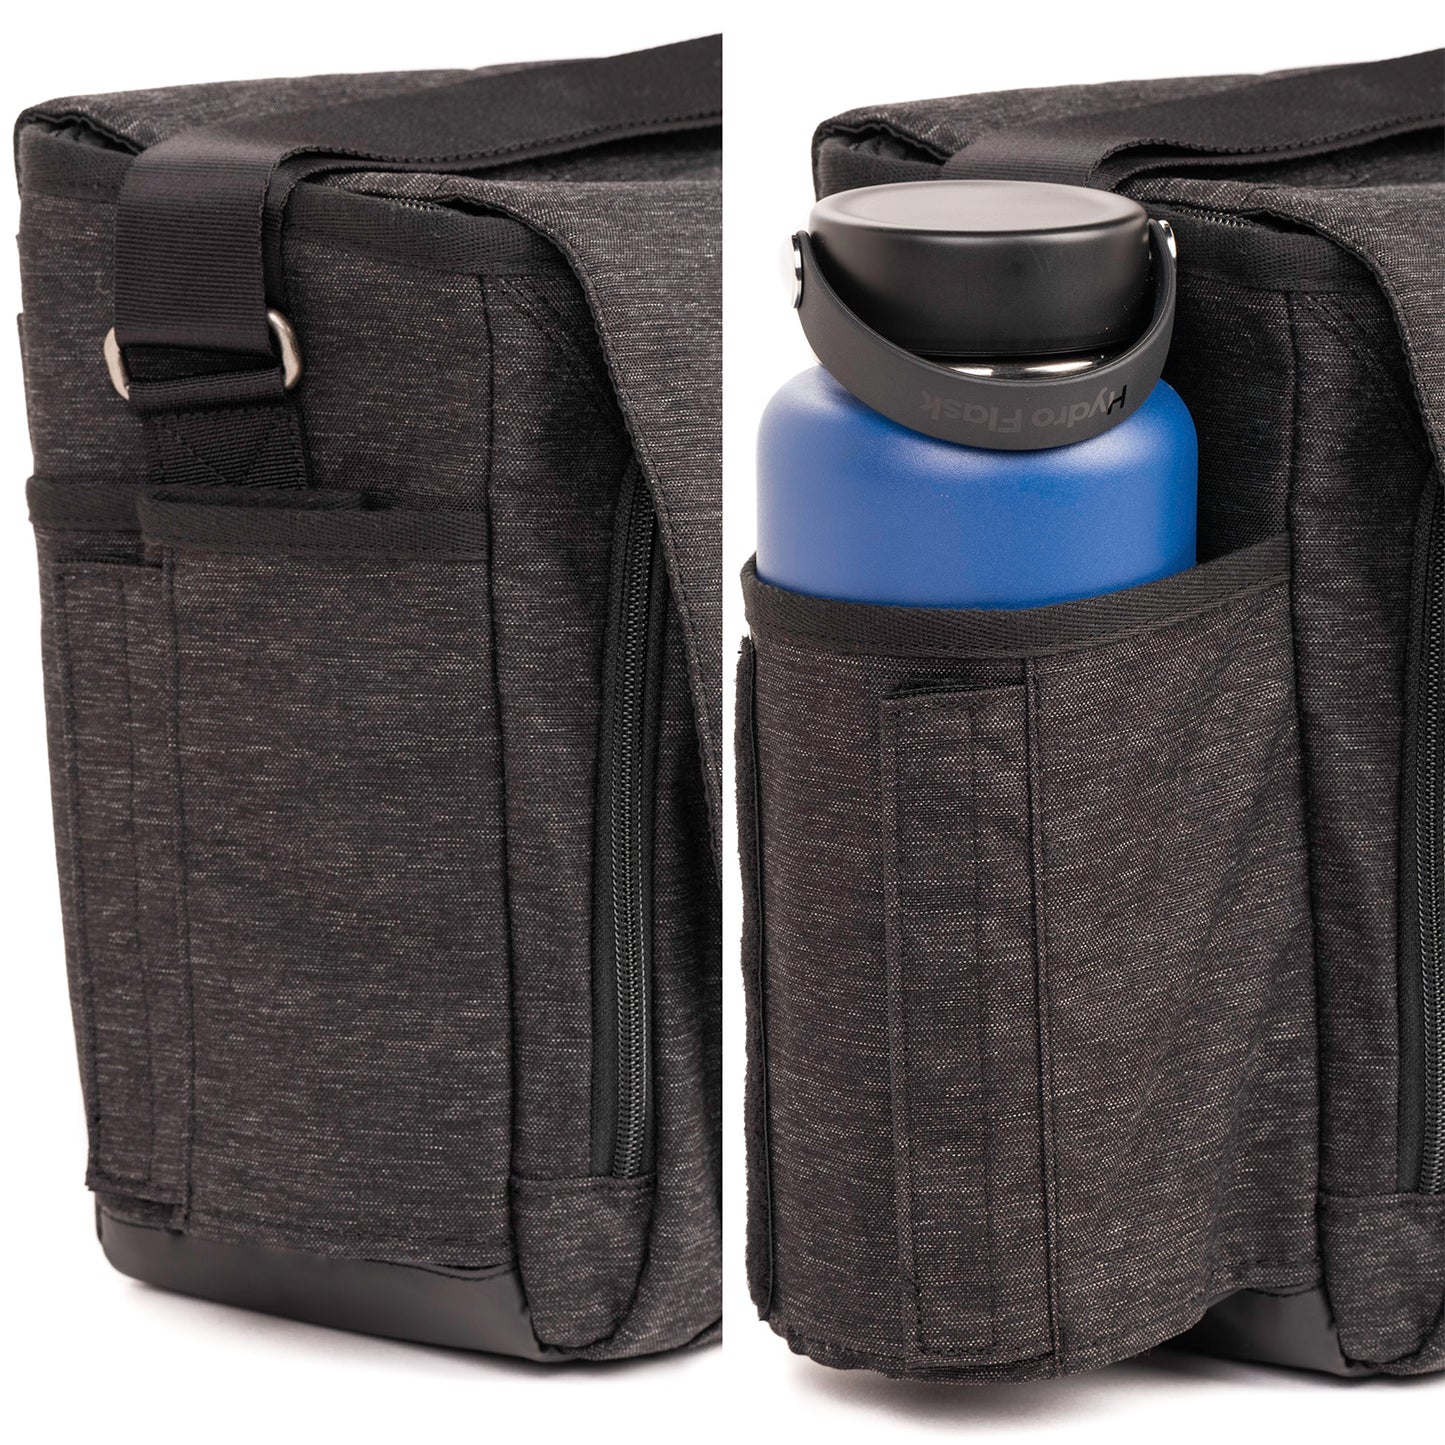 
                  
                    Expandable water bottle pocket fits all sizes and bottles of gear
                  
                